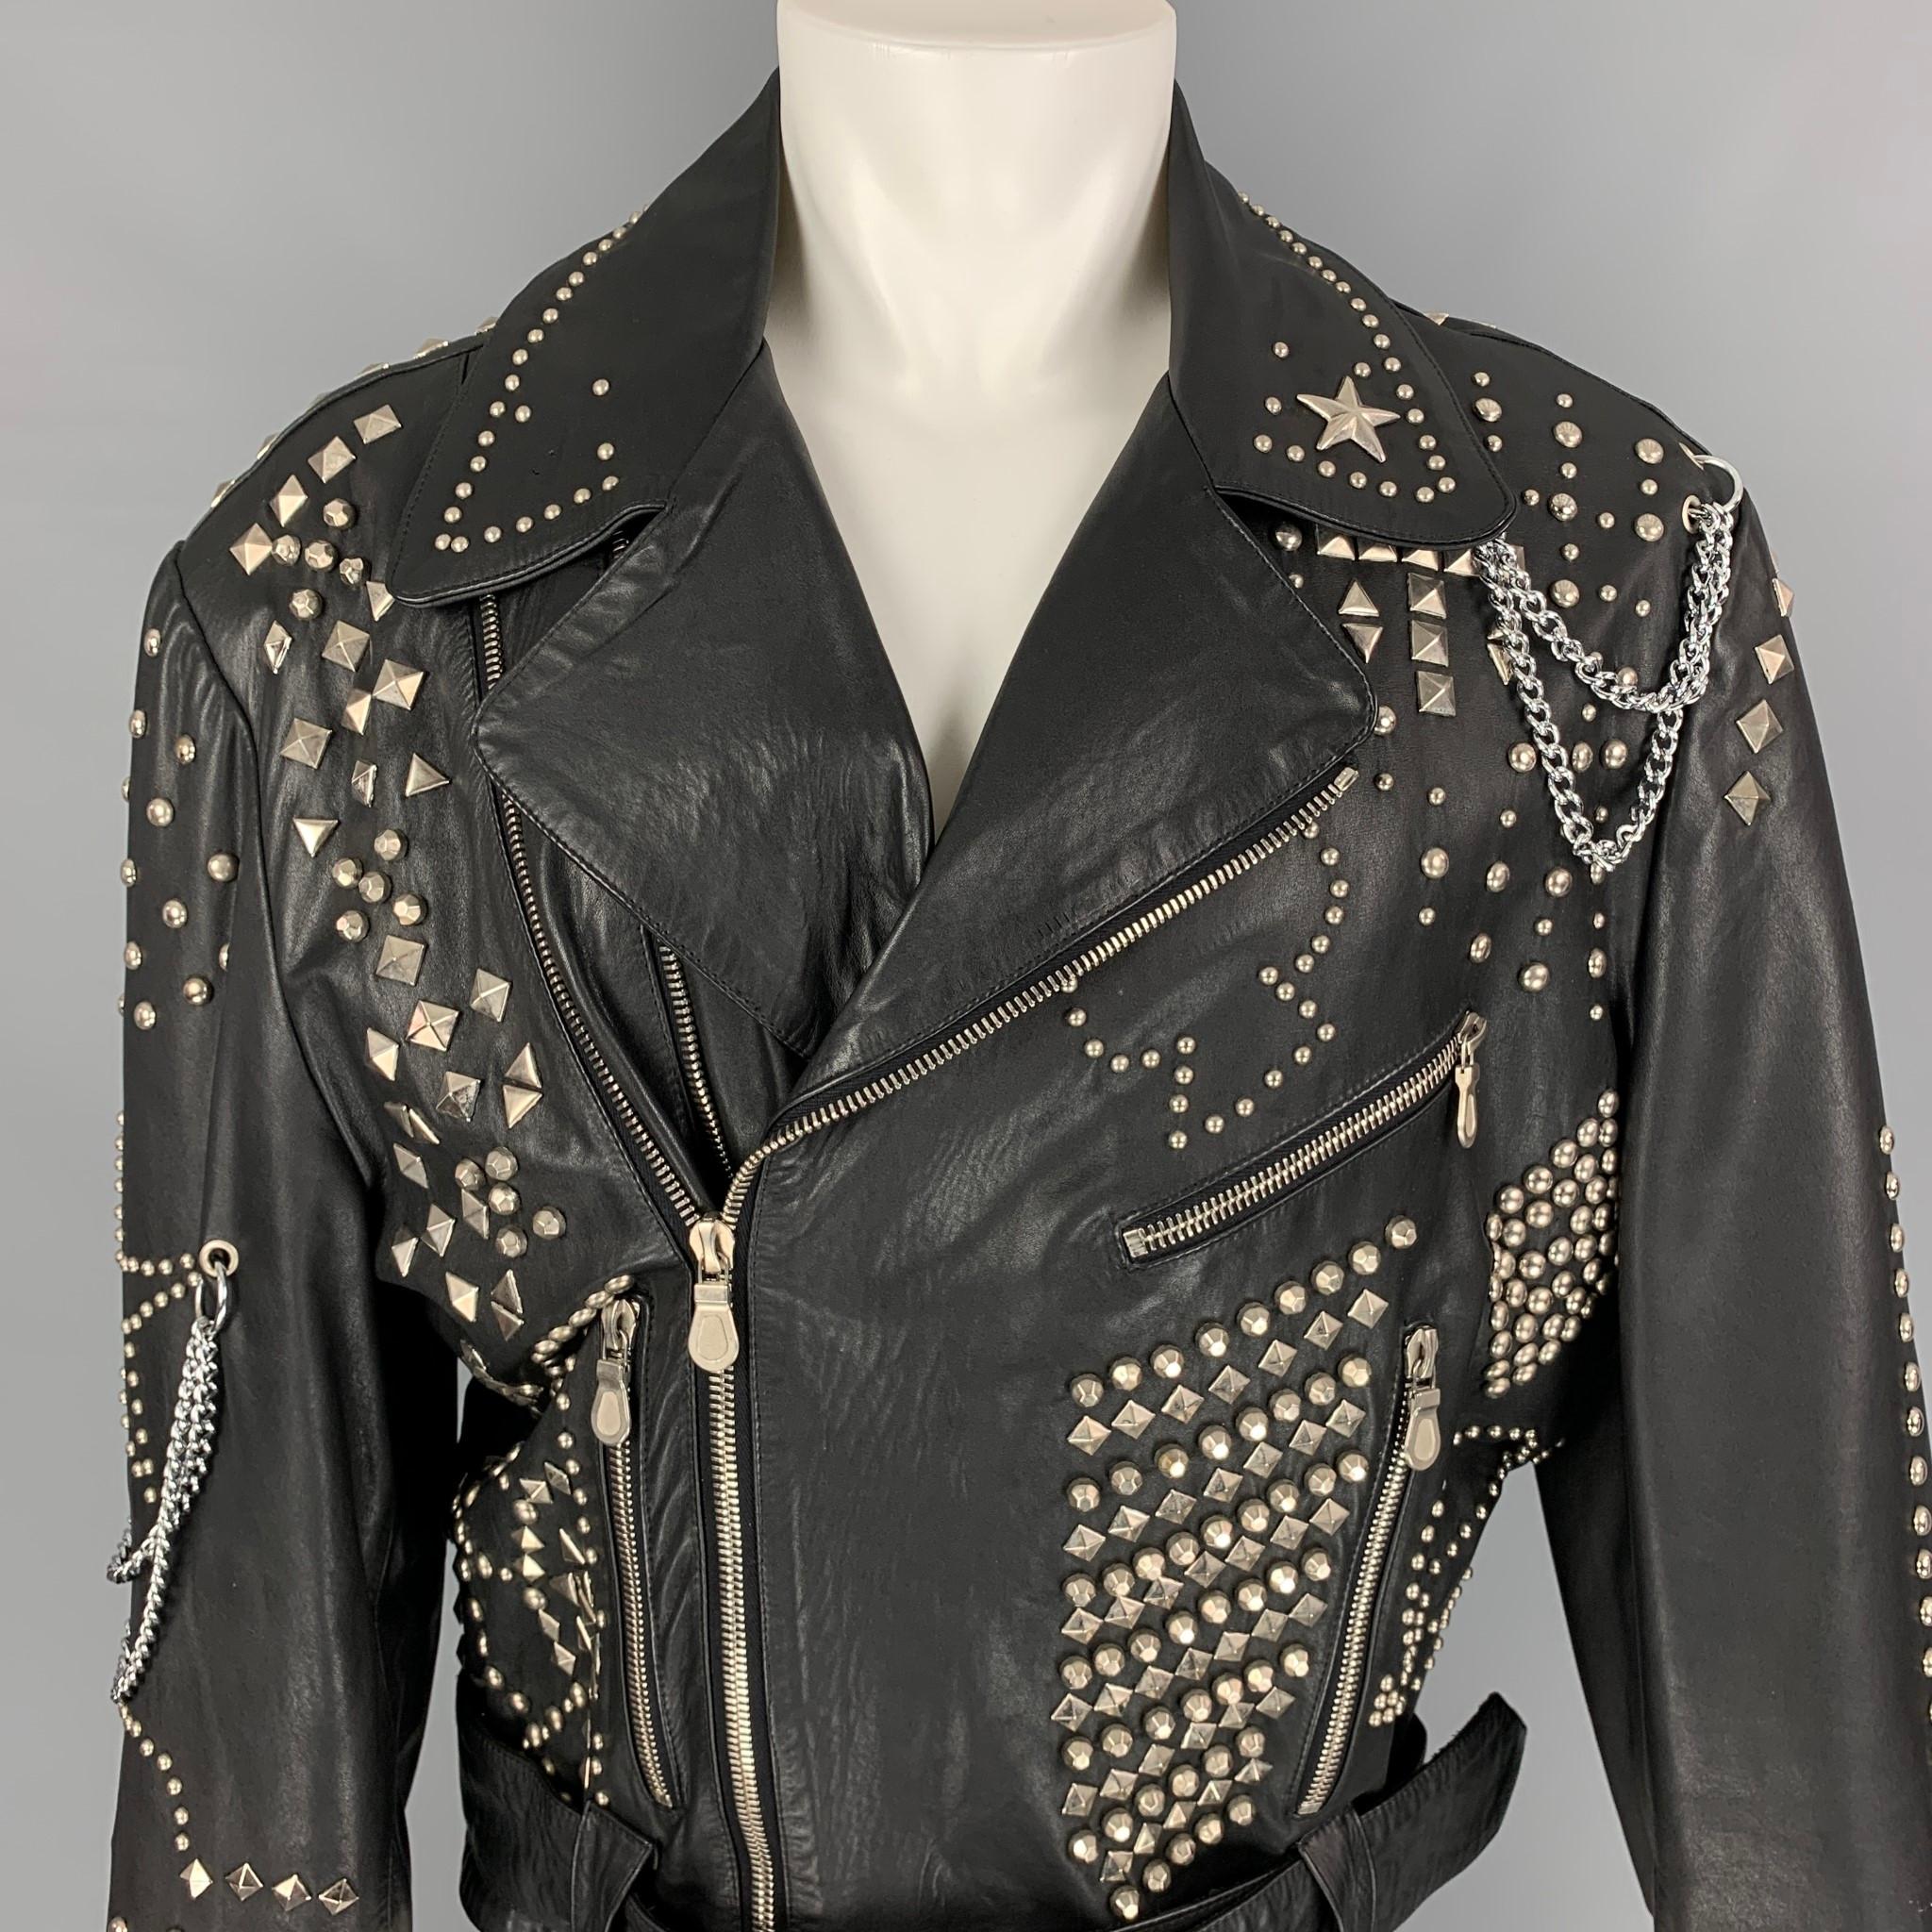 Vintage 1980's KATHERINE HAMNETT 'Clean Up or Die' Collection jacket comes in a black leather with a full quilted silk liner featuring studwork embellishment throughout, silver tone hardware, biker style, heavy zips, belted, chain link details, zip